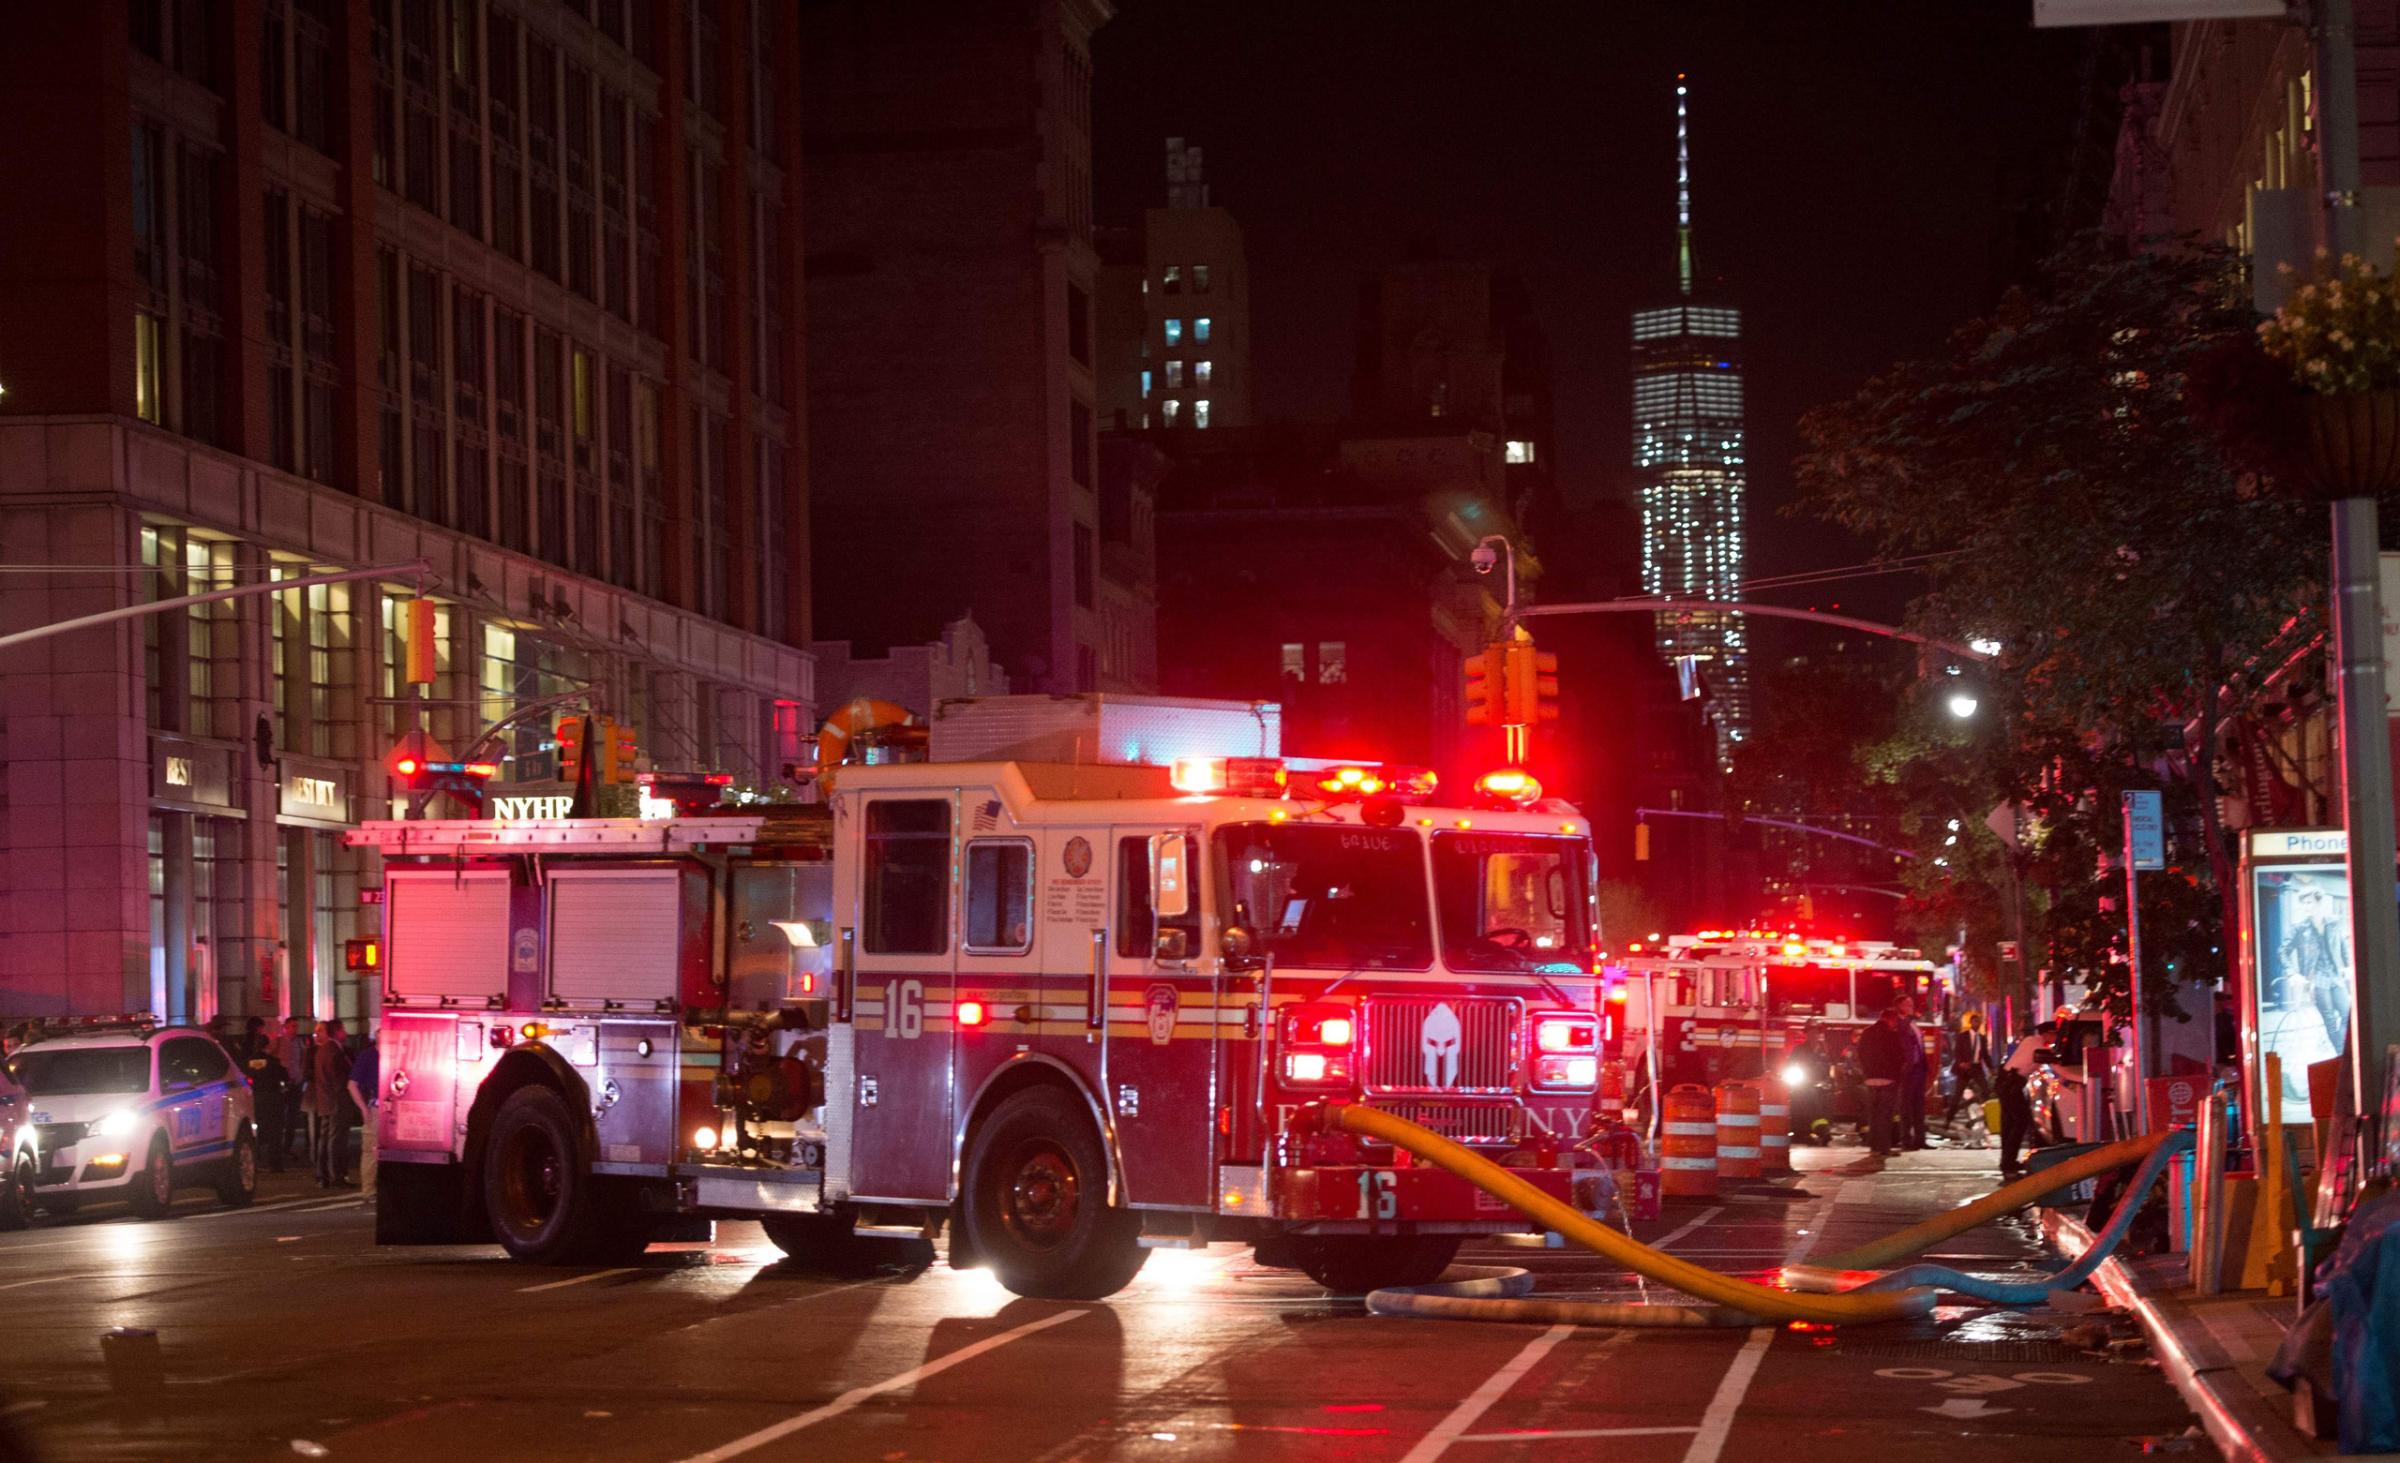 TOPSHOT - A fire truck is seen near a blocked off road near the site of an alleged bomb explosion on West 23rd Street on September 17, 2016, in New York. An explosion in New York's upscale and bustling Chelsea neighborhood injured at least 25 people, none of them in a life-threatening condition, late Saturday, the fire department said. / AFP PHOTO / Bryan R. SmithBRYAN R. SMITH/AFP/Getty Images